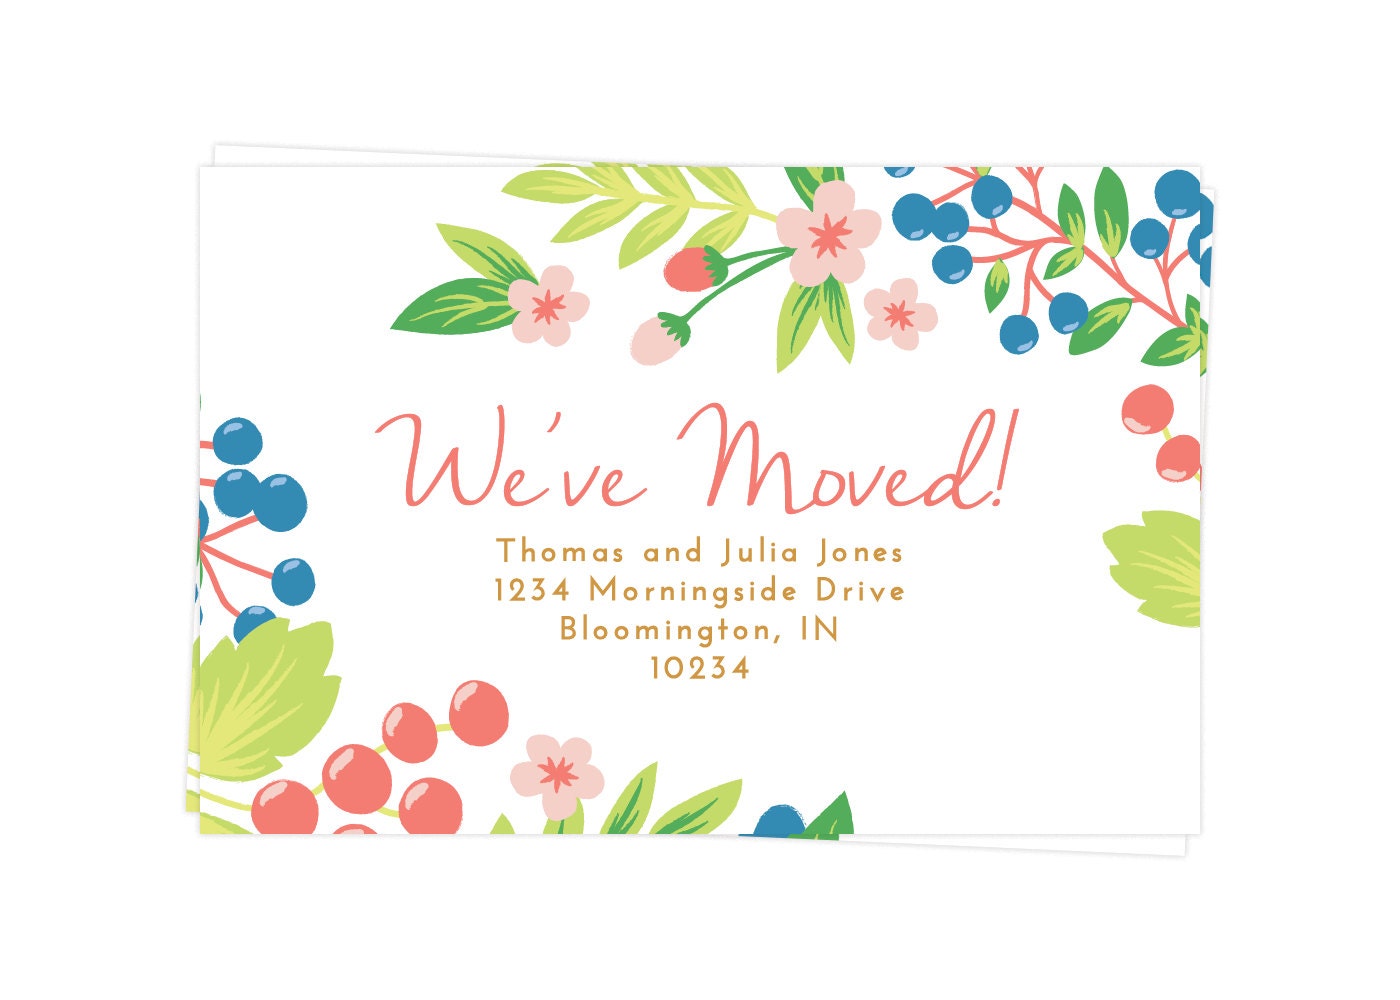 We've Moved Postcards Moving Announcement Cards by CardsByAgne